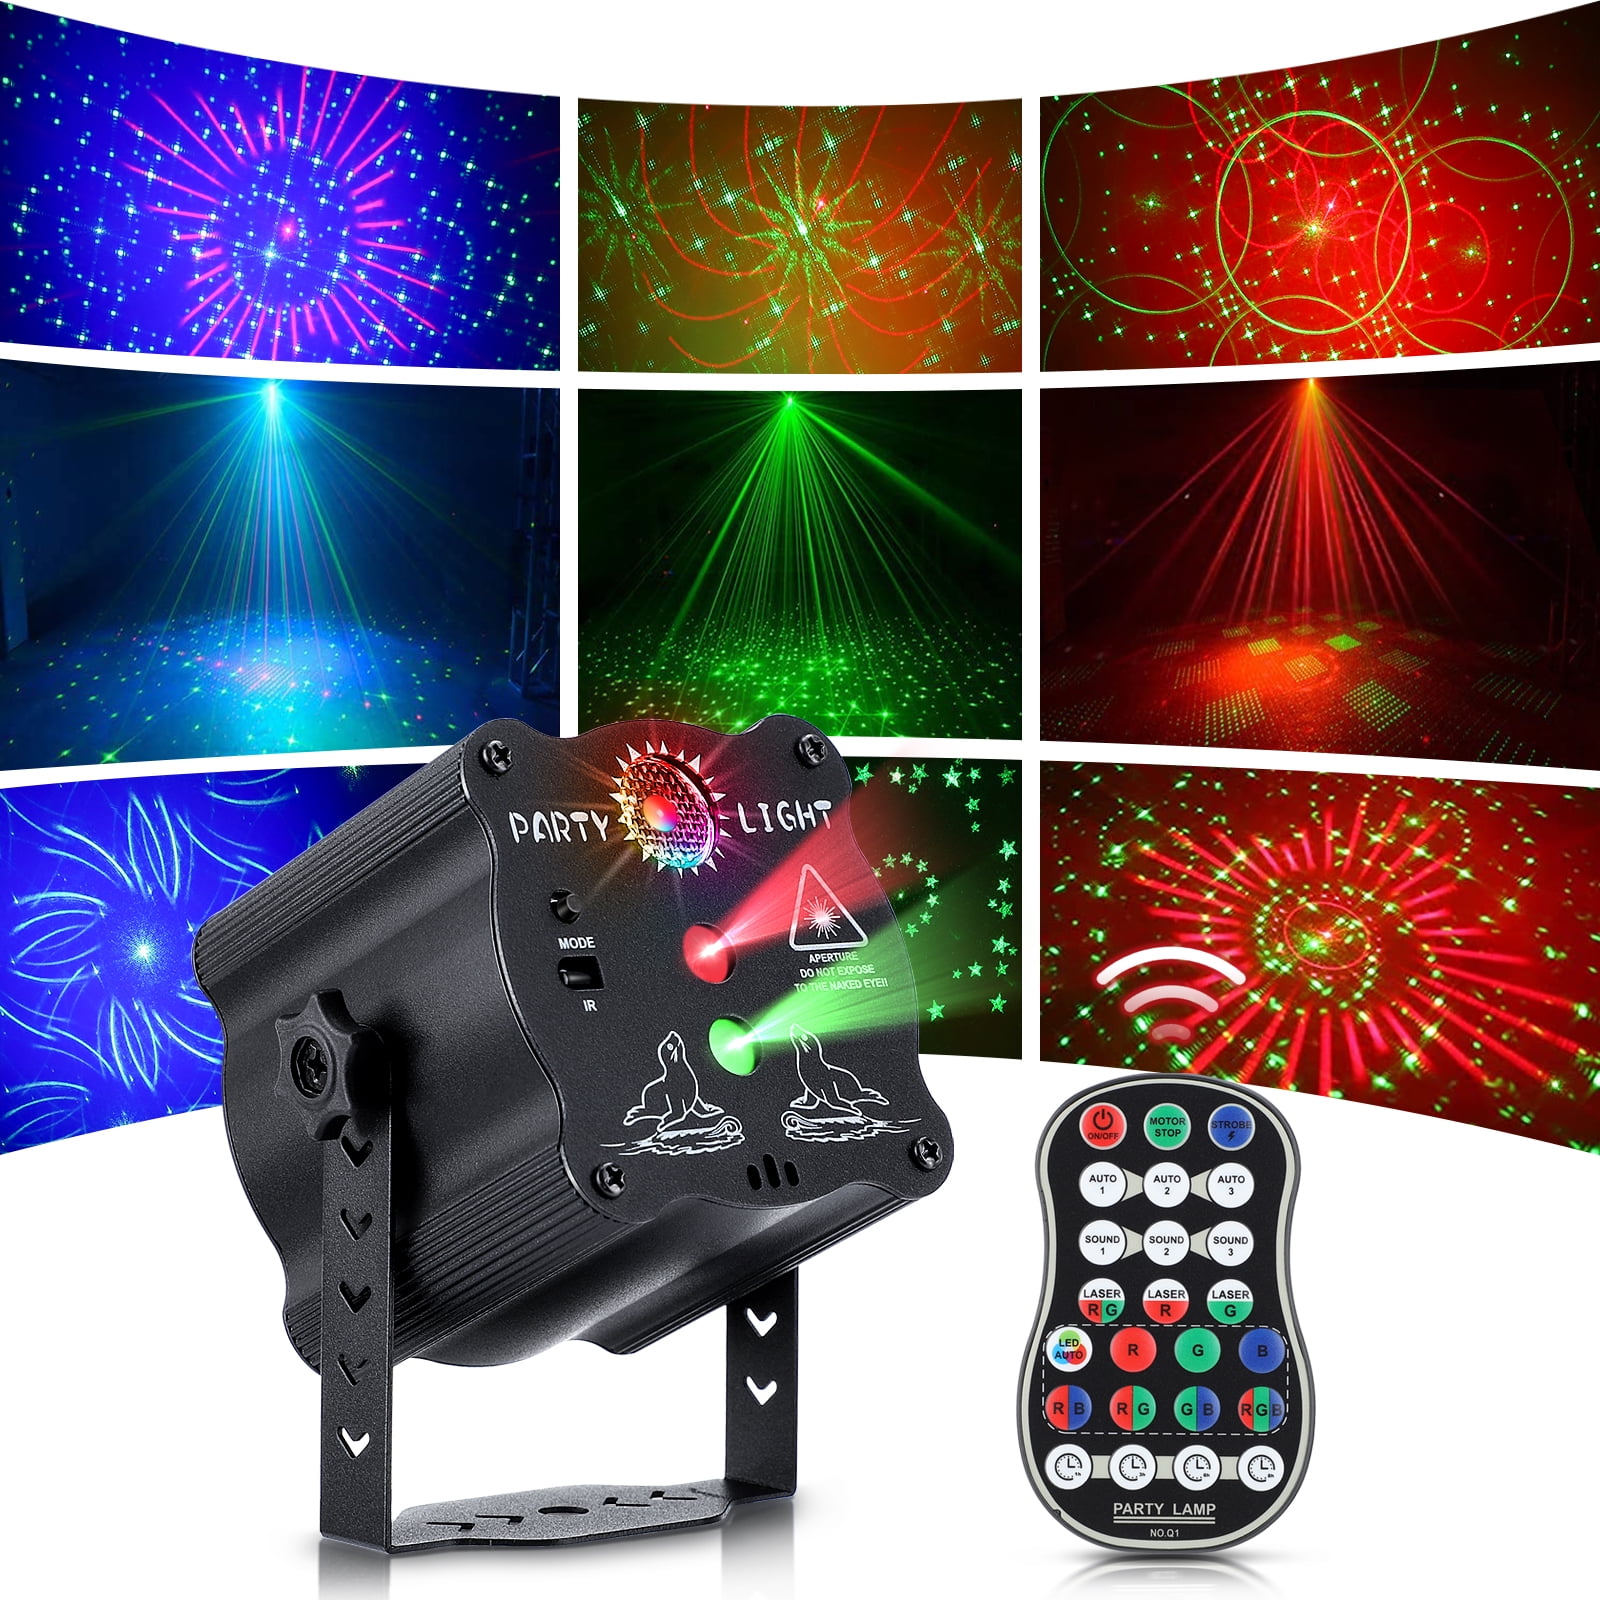 KTV 4 Pack SHEHDS DJ Lights LED Flat Par 7x18W 6in1 RGBWA+UV Lighting with Remote Control DMX Control Uplighting DJ Show Party Disco Club Sound Activated Auto Run for Wedding 